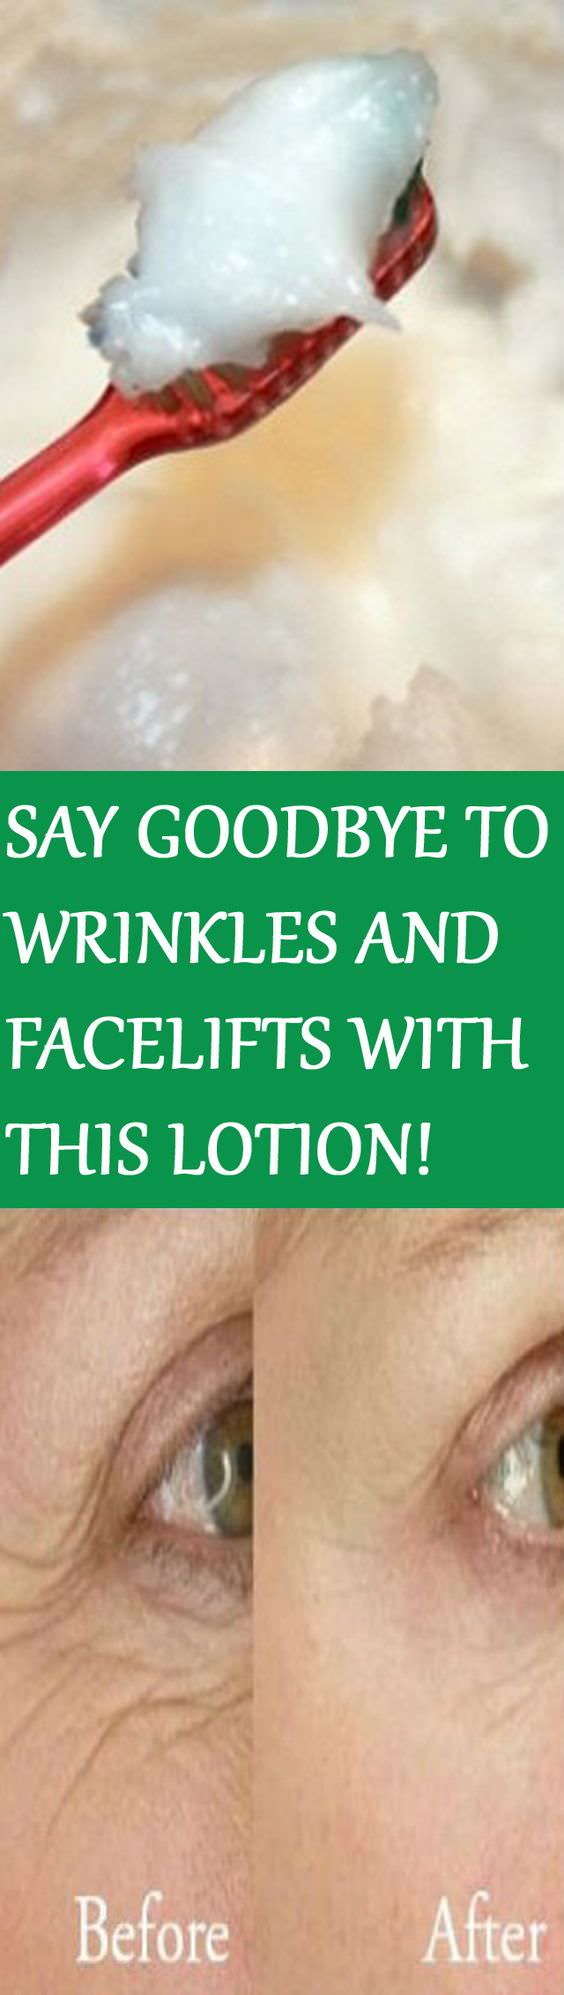 These two powerful ingredients can help you in reducing wrinkles and facelifts. No chemical, it's all natural. Check out the recipe!